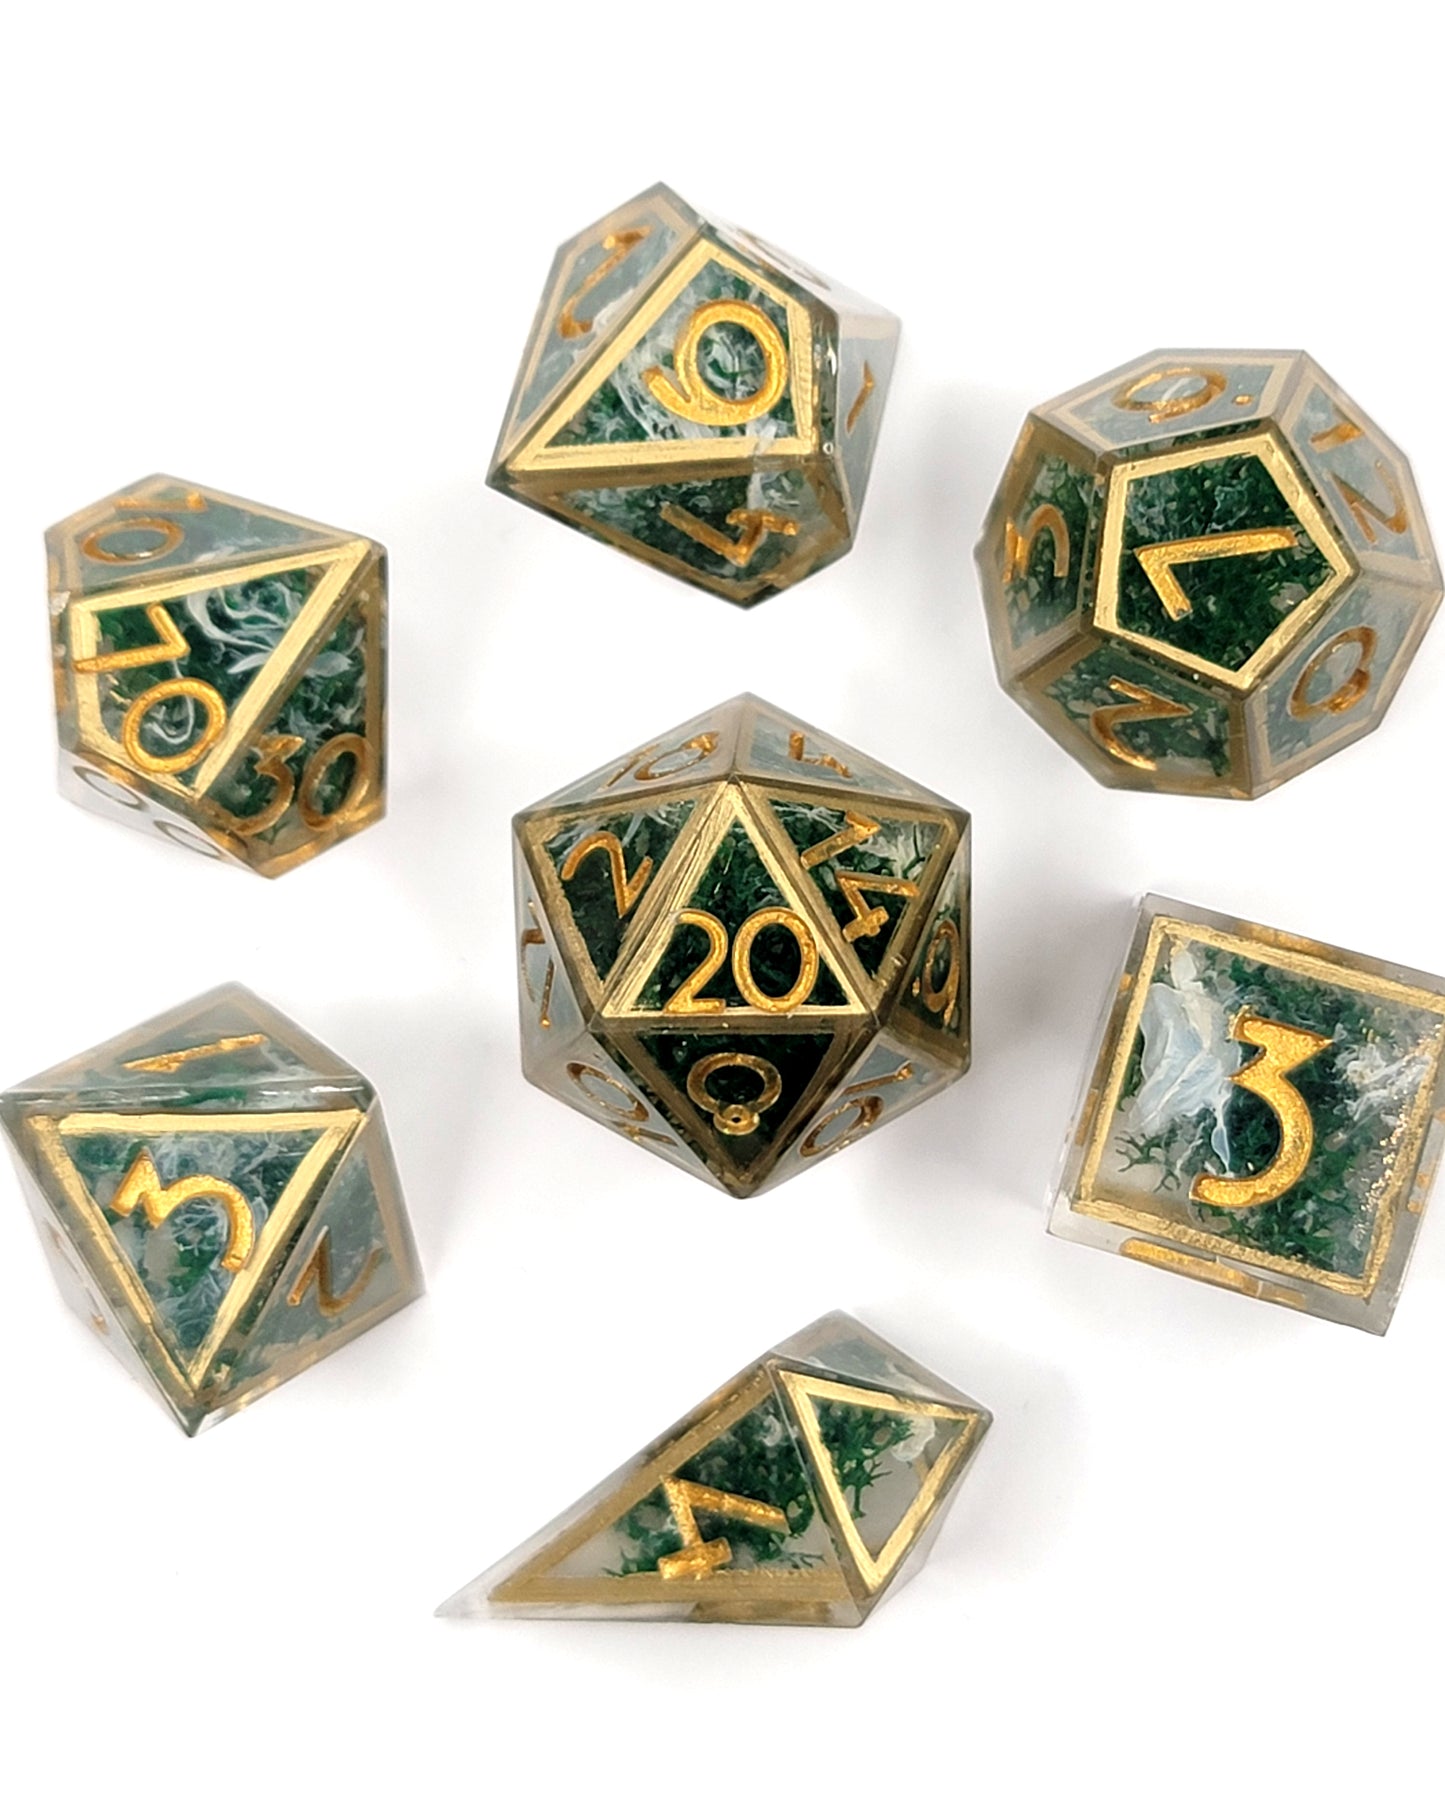 Moss and Mists - 7 Piece handmade D&D Dice| Hand Crafted Dungeons and Dragons Dice